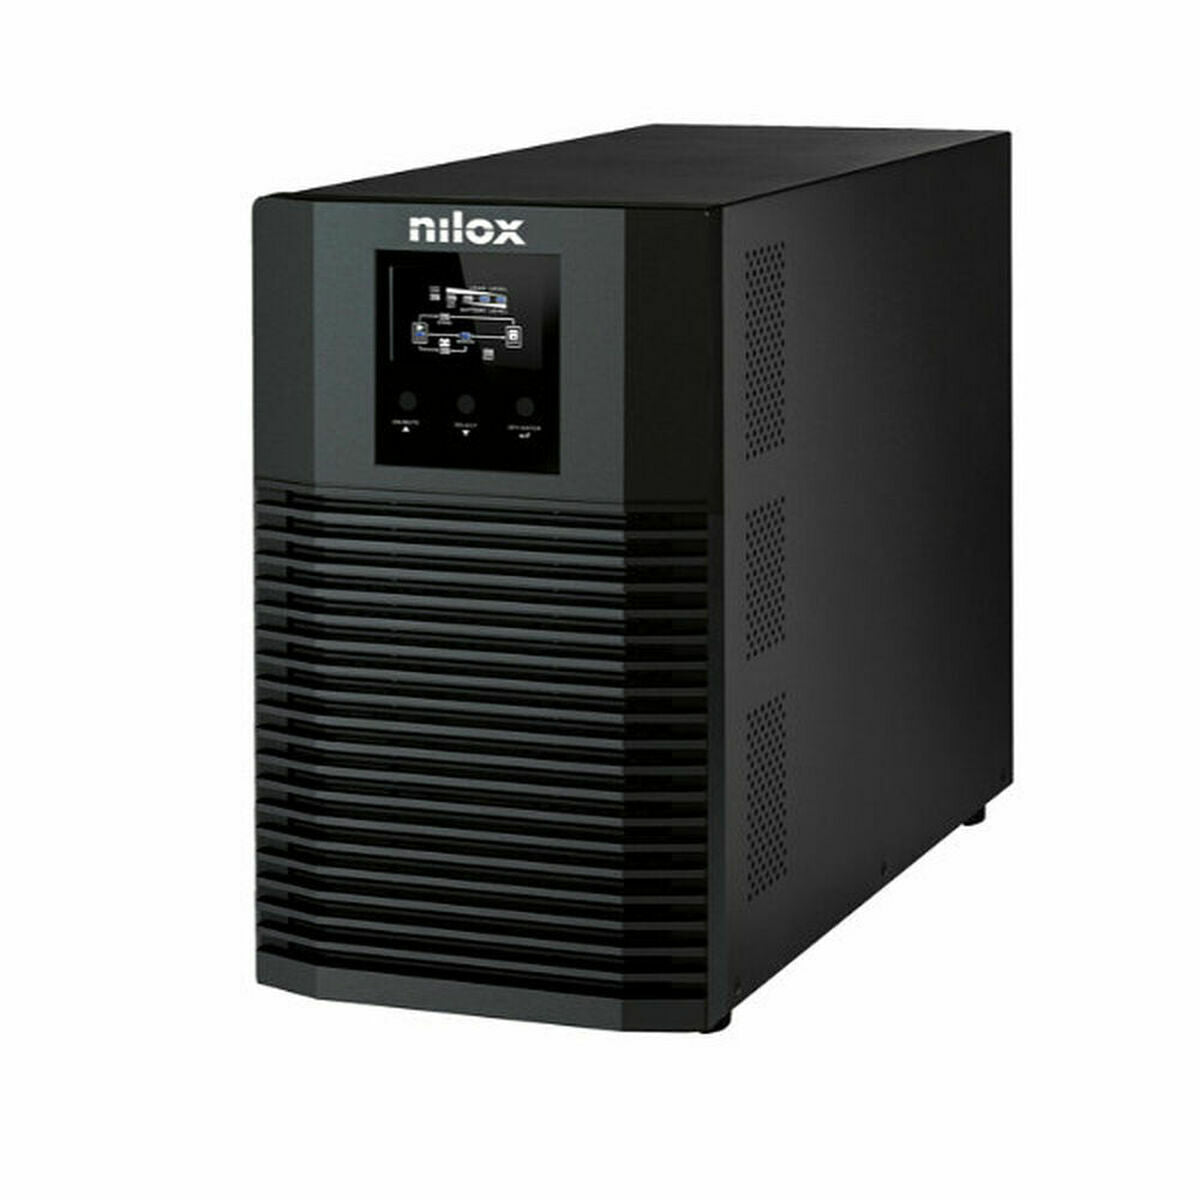 Online Uninterruptible Power Supply System UPS Nilox NXGCOLED456X9V2, Nilox, Computing, Accessories, online-uninterruptible-power-supply-system-ups-nilox-nxgcoled456x9v2, Brand_Nilox, category-reference-2609, category-reference-2642, category-reference-2845, category-reference-t-19685, category-reference-t-19908, category-reference-t-21341, computers / peripherals, Condition_NEW, office, Price_700 - 800, Teleworking, RiotNook